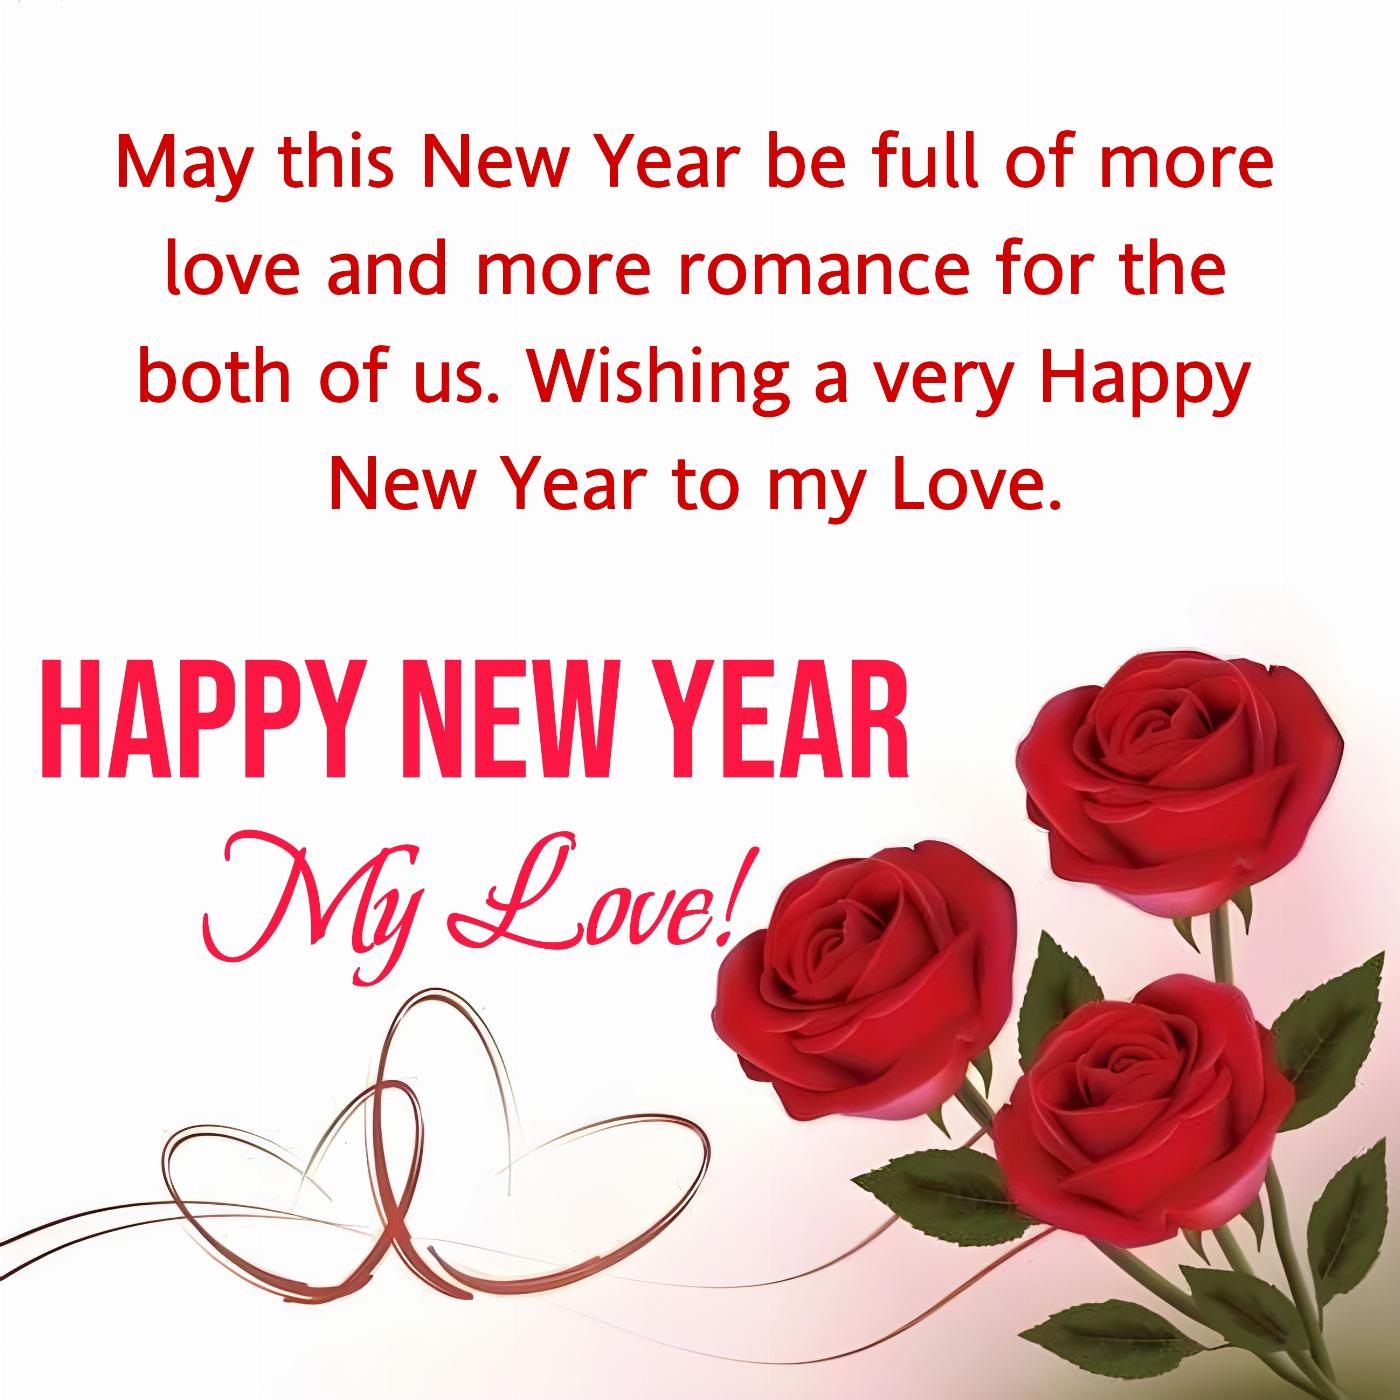 May this New Year be full of more love